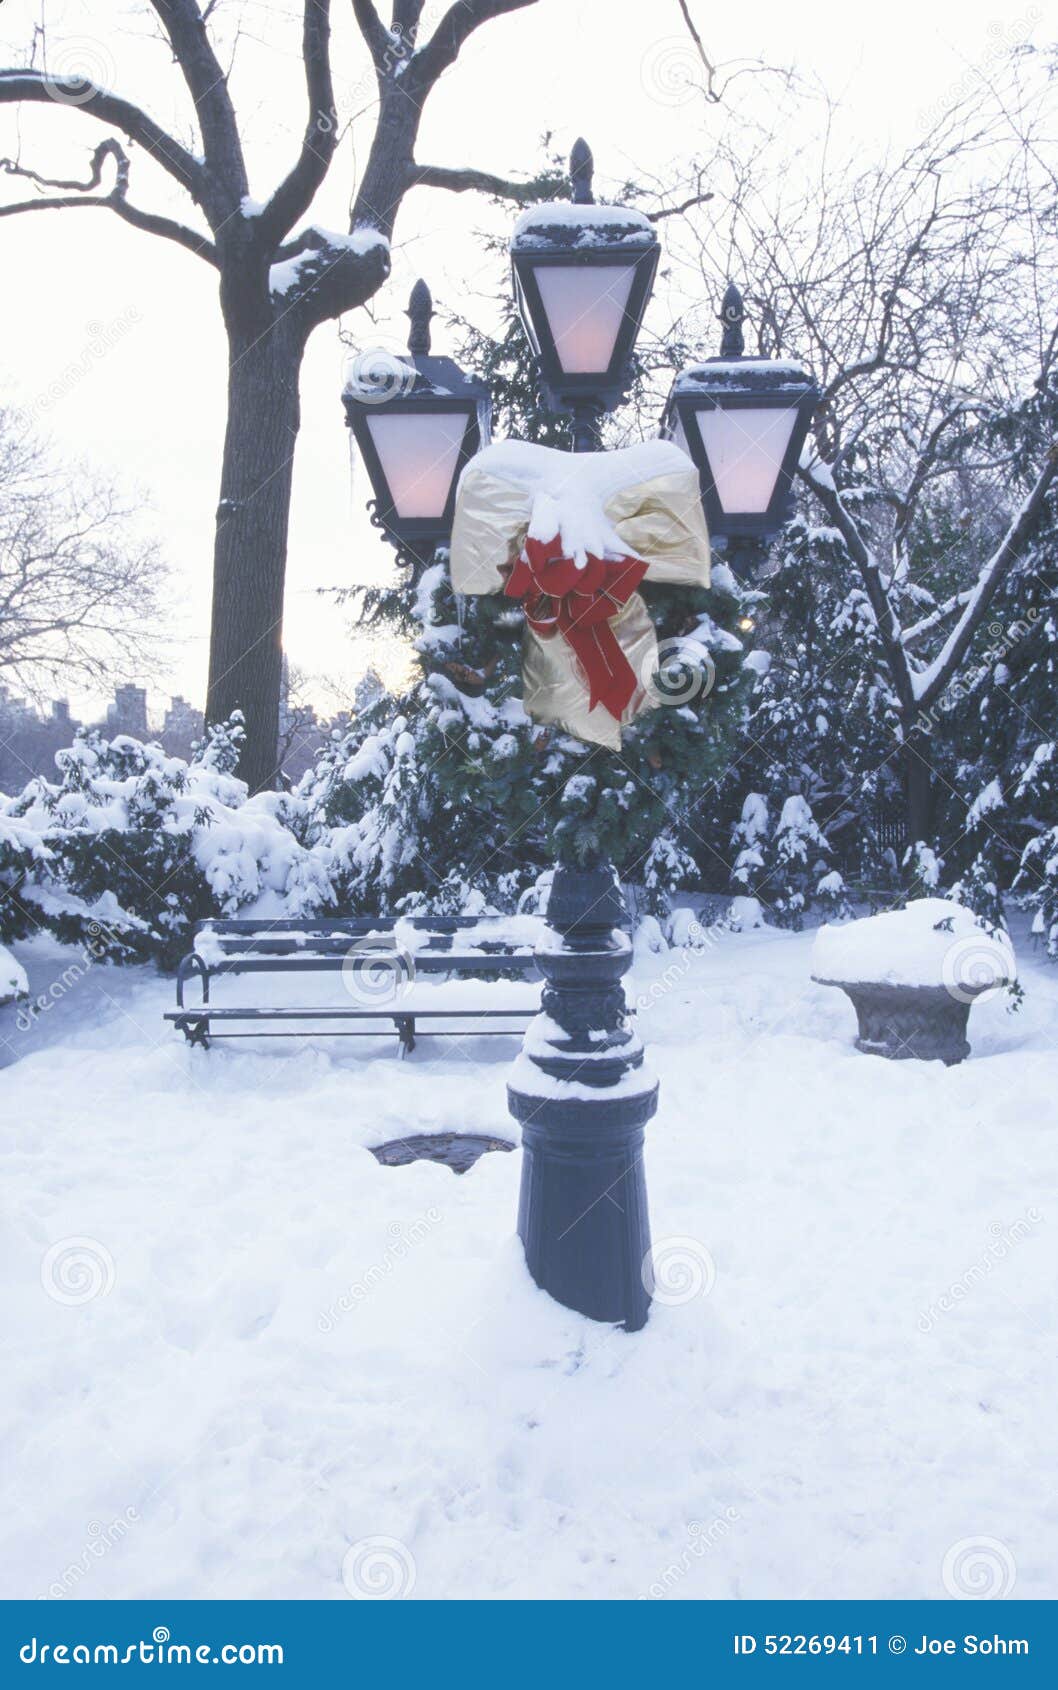 snow covered lampposts and christmas decor with fresh snow in central park, manhattan, ny